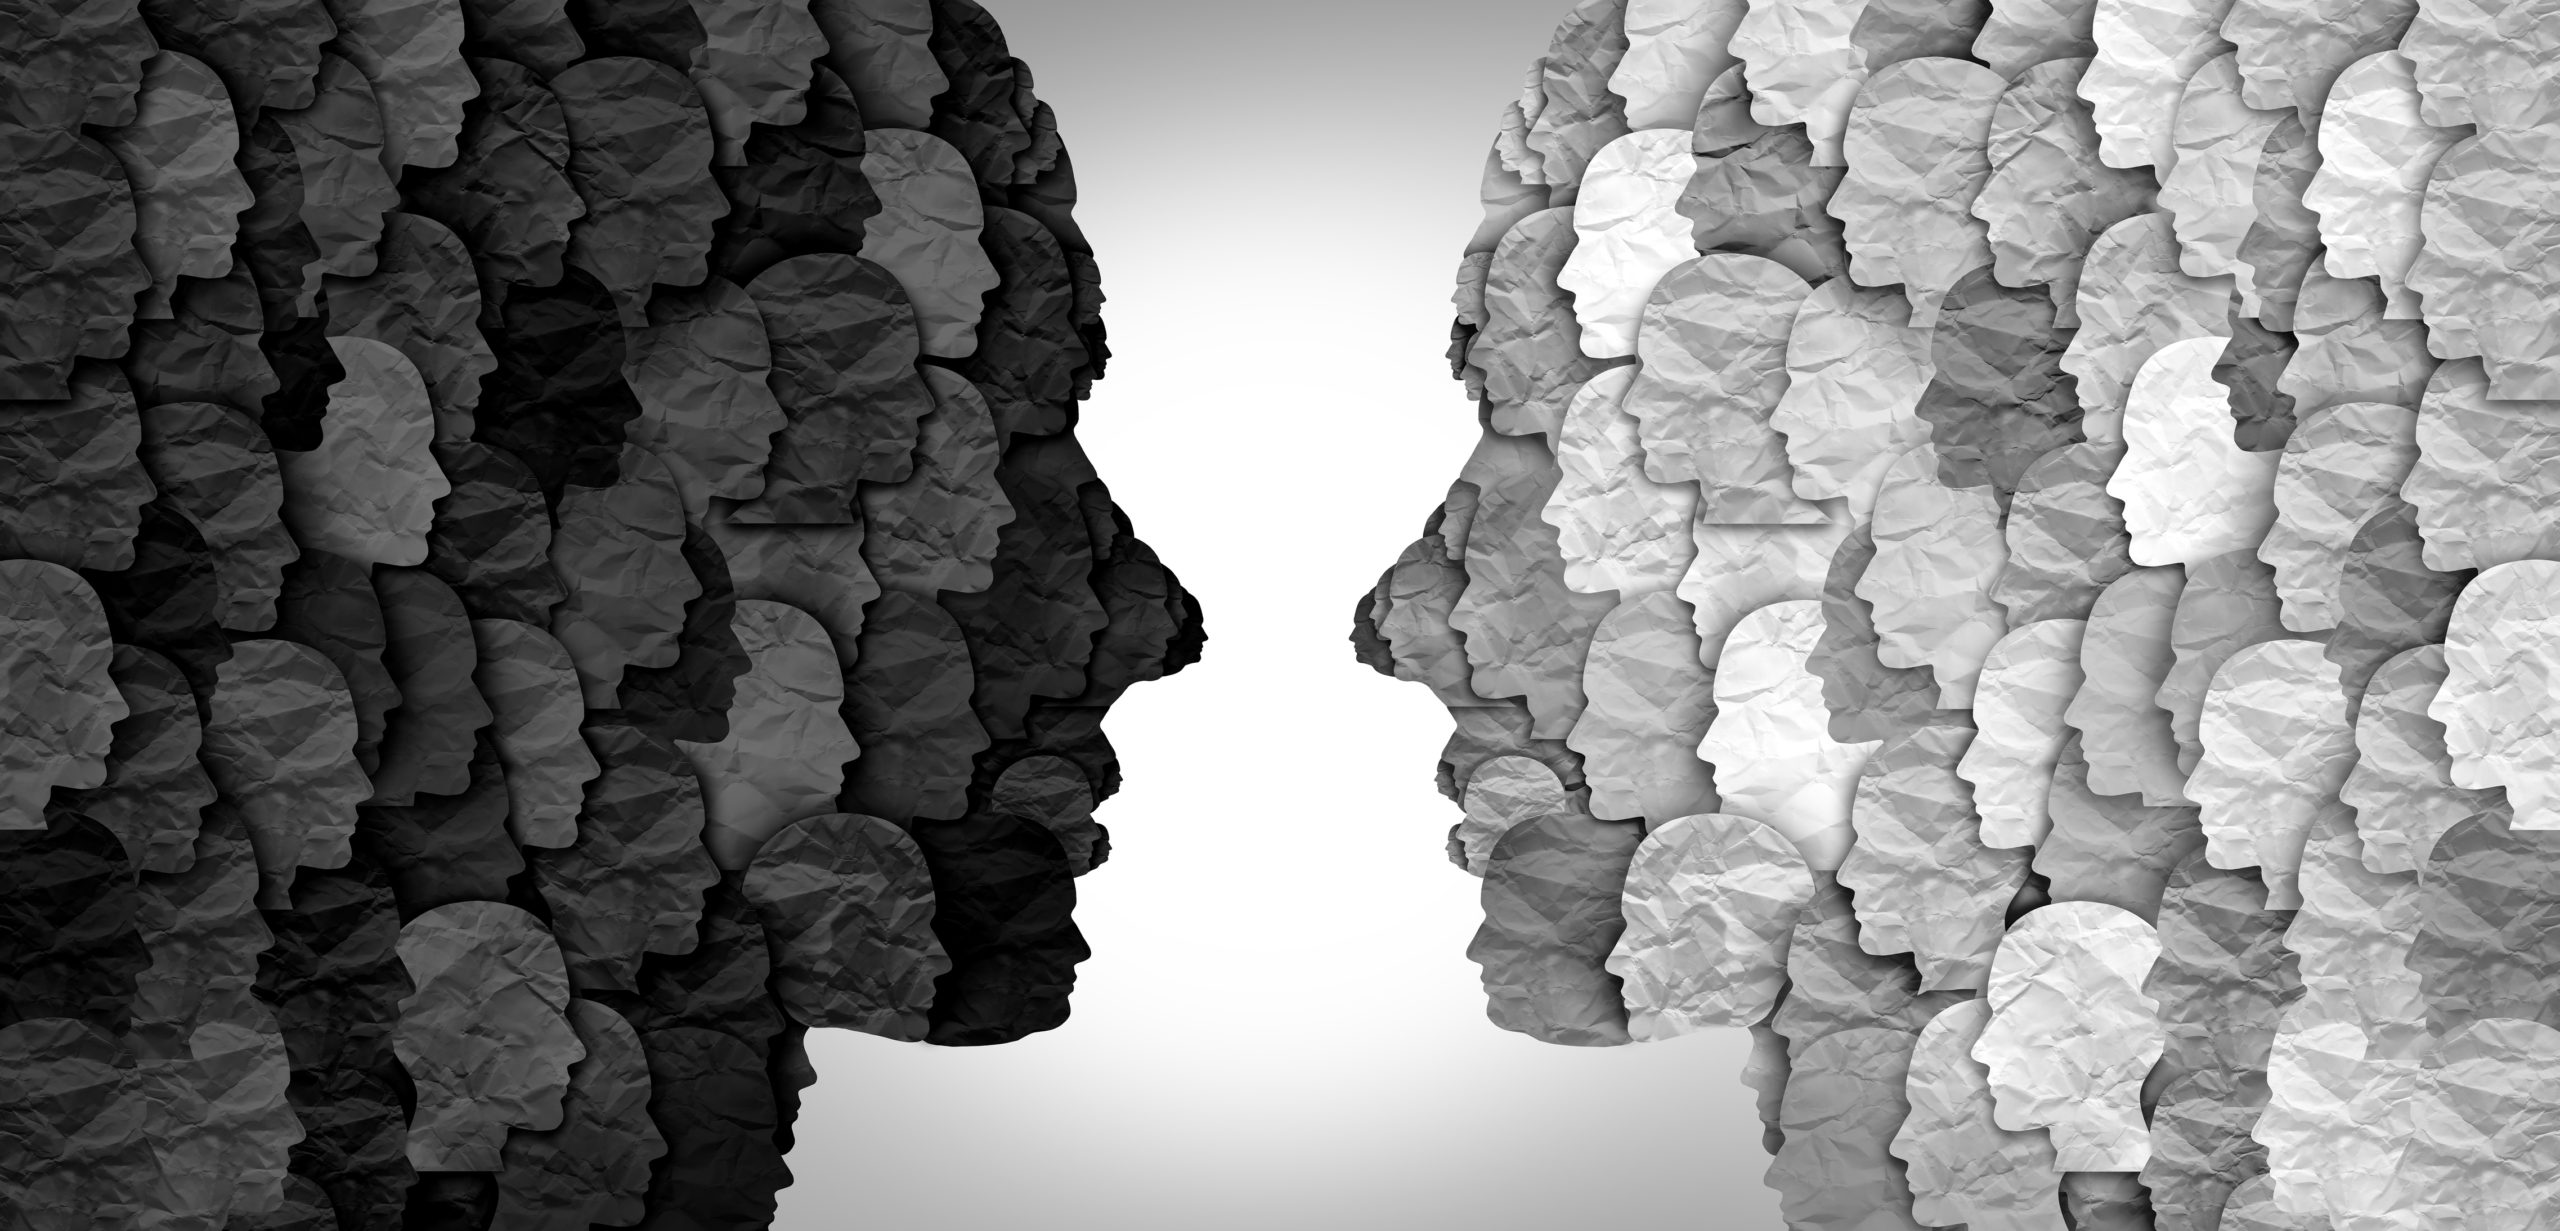 Illustration of silhouettes of two faces in profile facing one another with each silhouette comprised of smaller versions of the same larger face. One is comprised of shades of dark gray and black, the other of light gray and white.